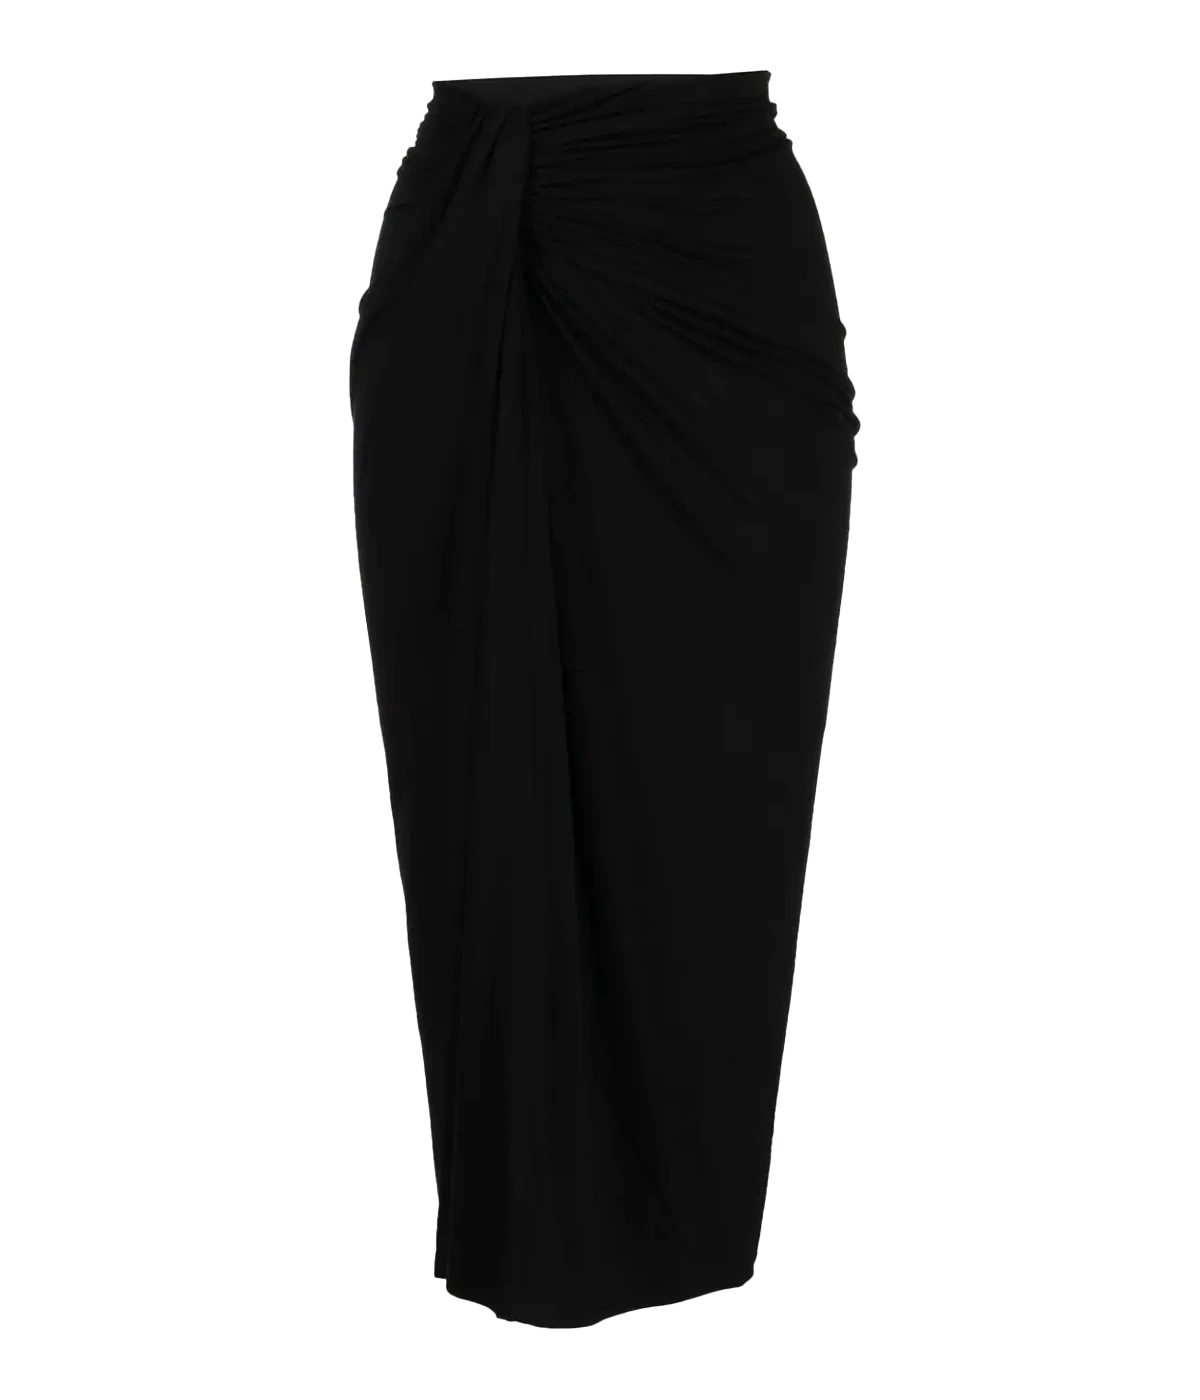 An elevated basic jersey midi skirt, in black colourway featuring a knotted gathered detail, midi length and stretch for comfort. Made internationally, long lunch, elevated basic, comfortable, wardrobe staple, work wear. 